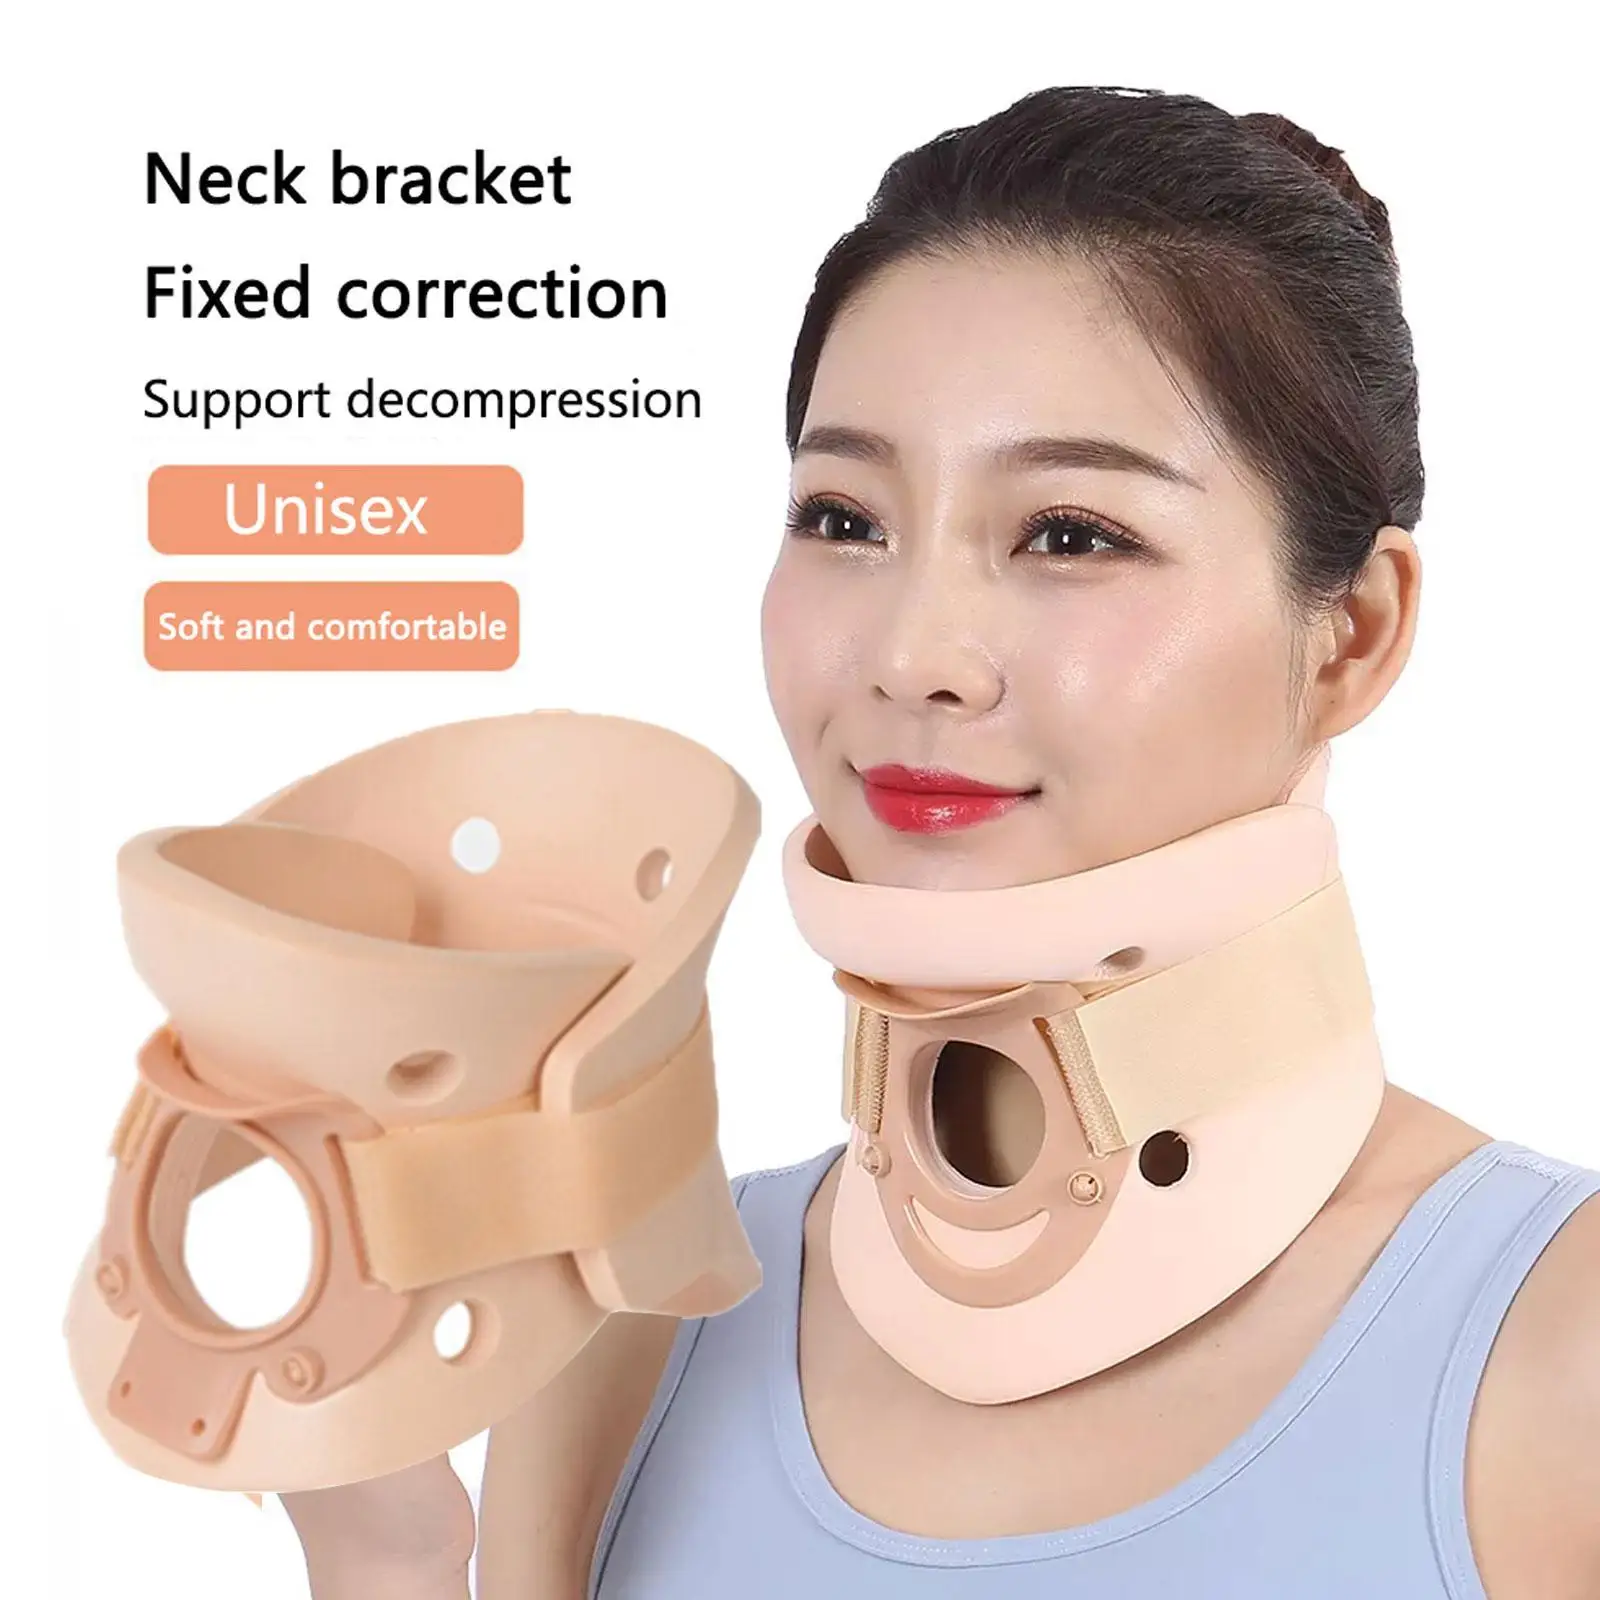 

Adjustable Neck Brace Cervical Traction Spinal Protector Orthotics Neck Support Pain Relief Cervical Collar Neck Fixator